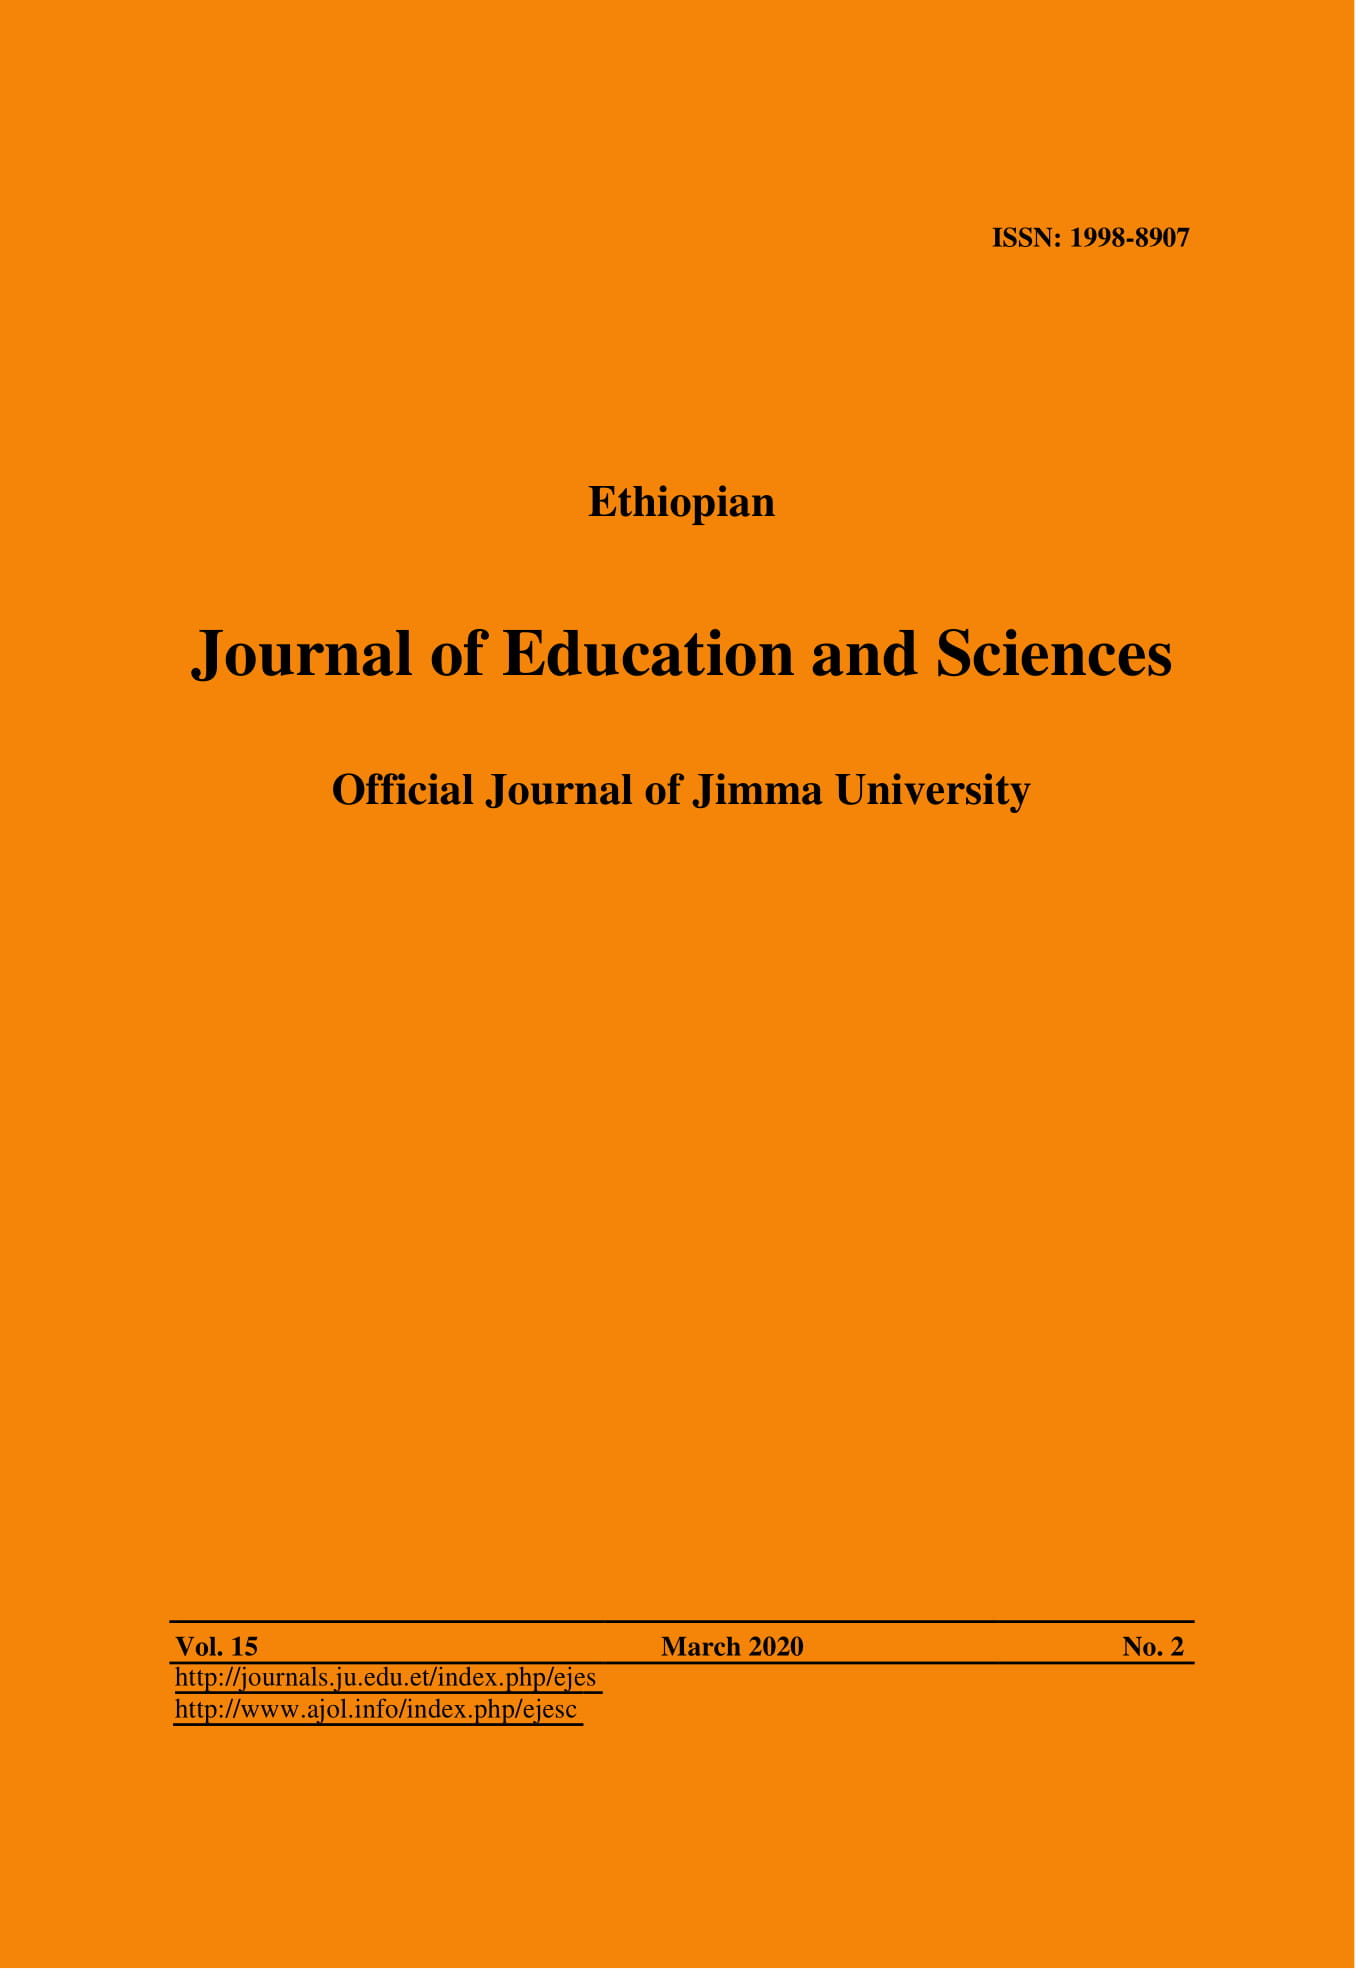 journal article review in ethiopia